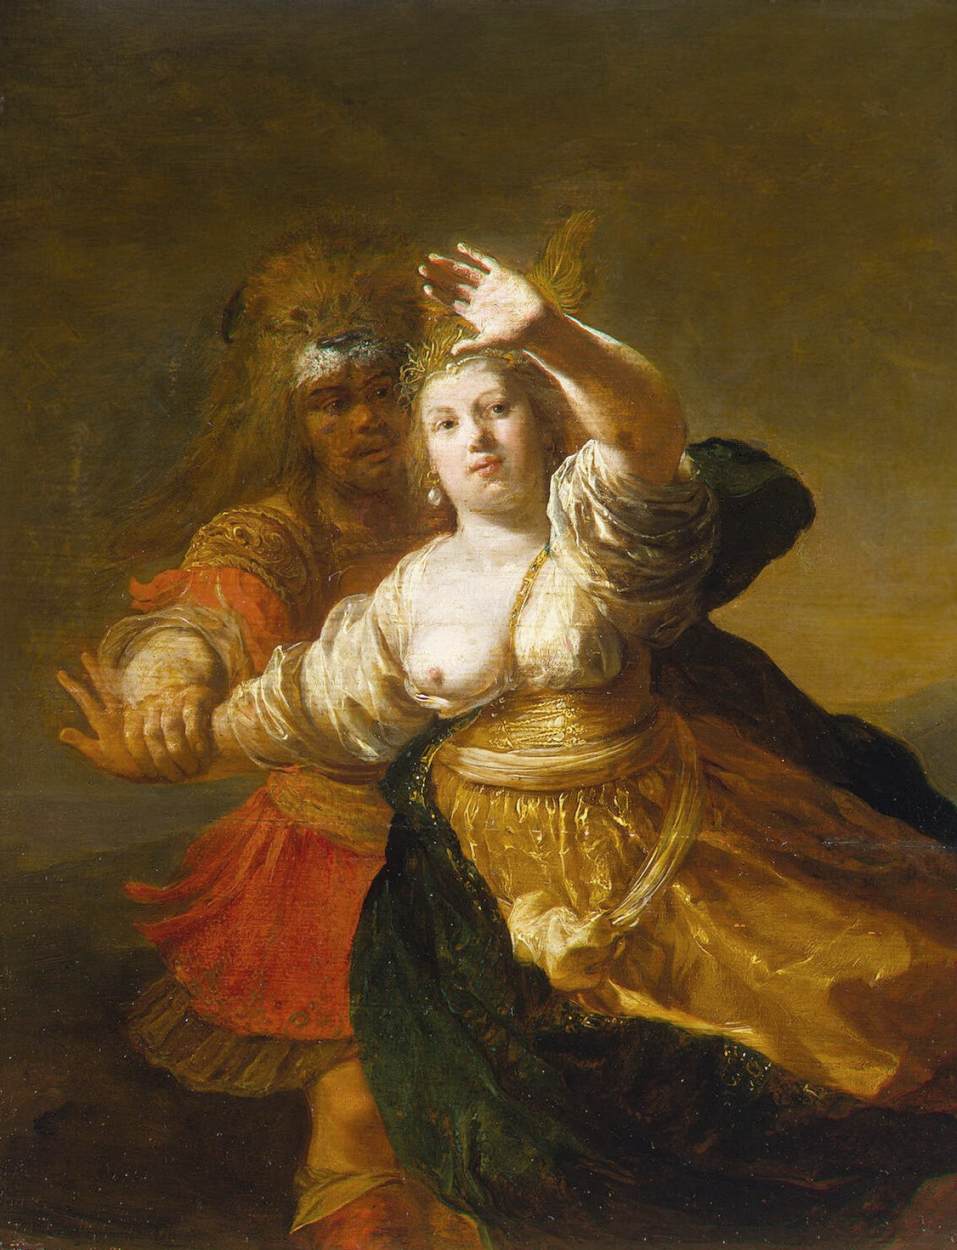 A painting of Hercules pulling back Hippolyta's arm